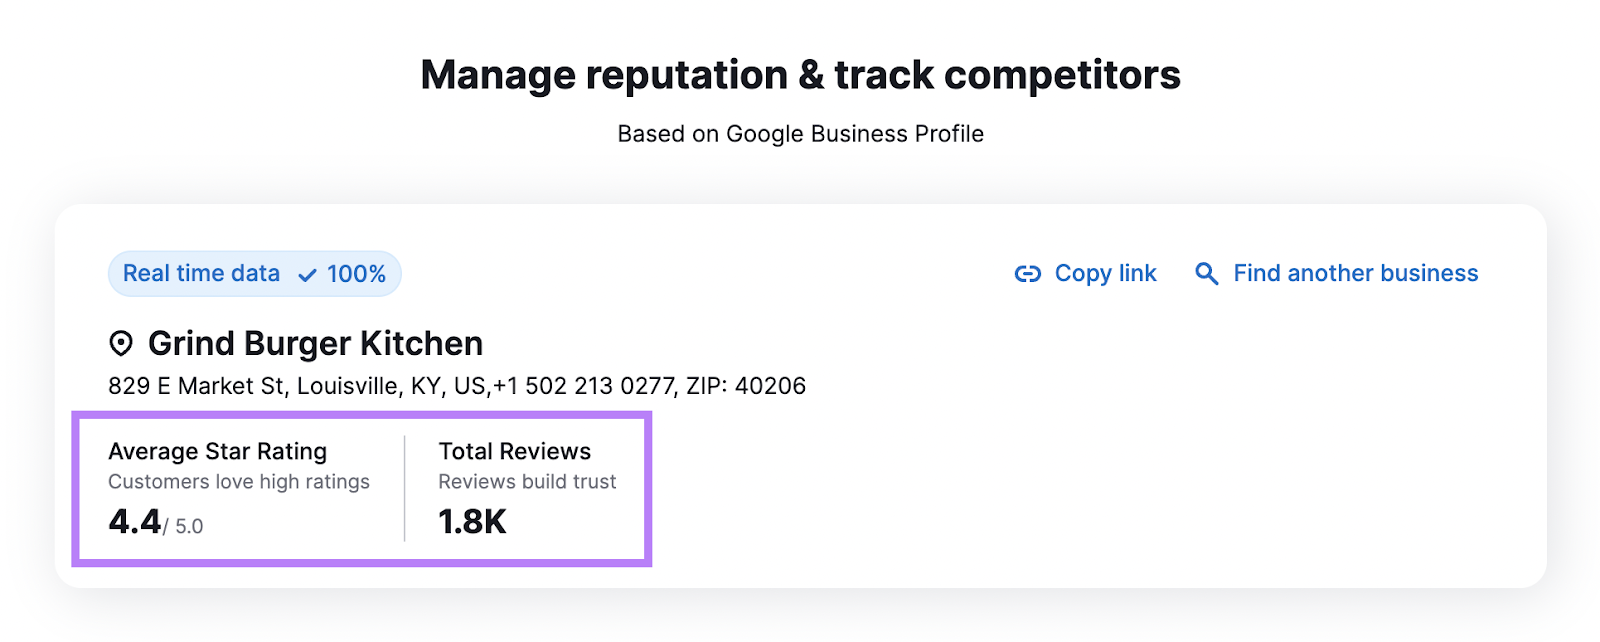 “Manage reputation & track competitors" section of Review Management tool